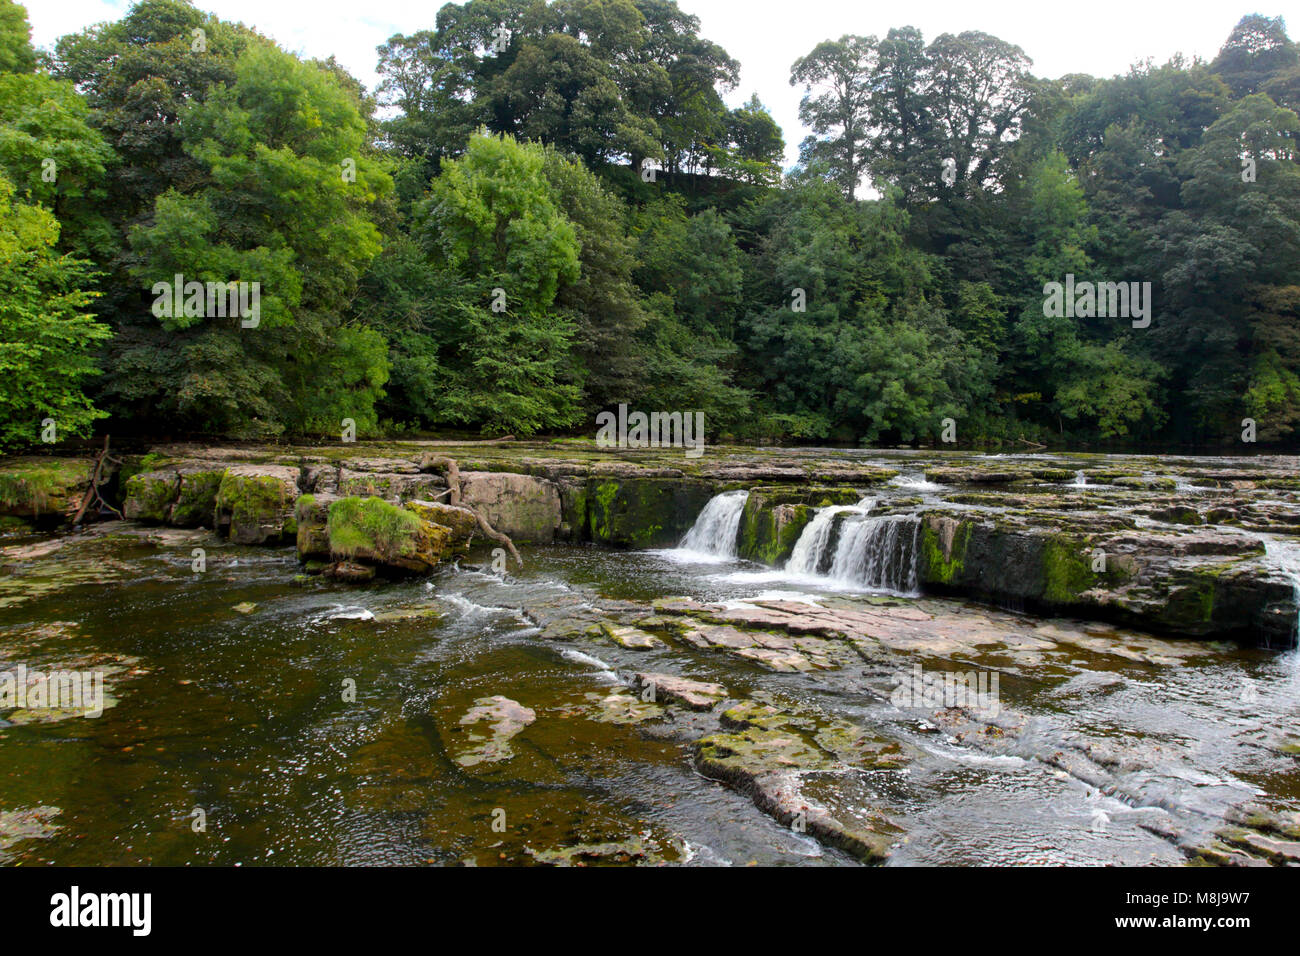 Aysgarth lower falls on the River Ure, Yorkshire Dales National Park, North Yorkshire, England Stock Photo